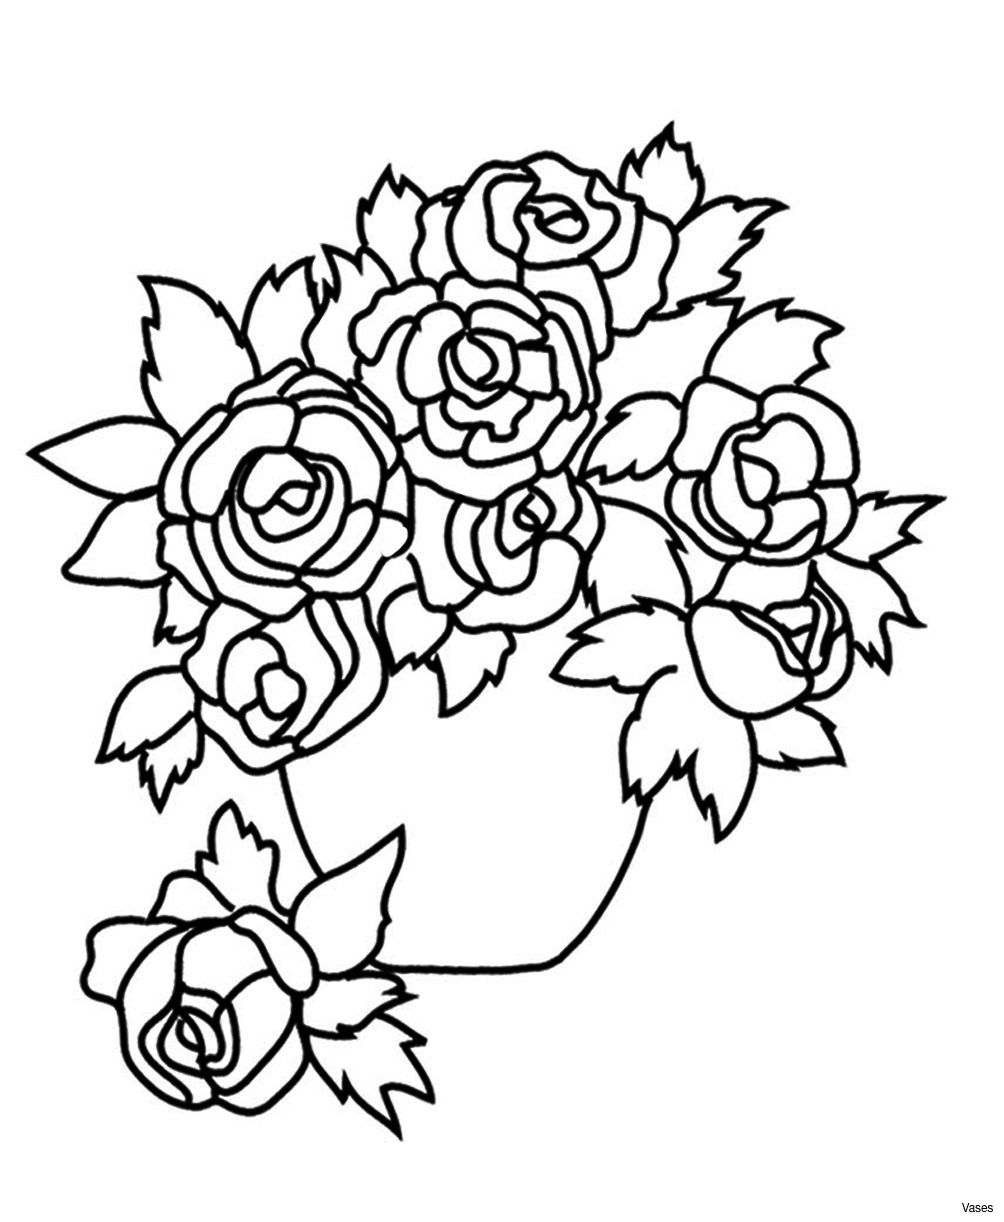 21 Recommended Types Of Vases for Flowers 2024 free download types of vases for flowers of cool vases flower vase coloring page pages flowers in a top i 0d pertaining to cool coloring pages cool vases flower vase coloring page pages flowers in a top i